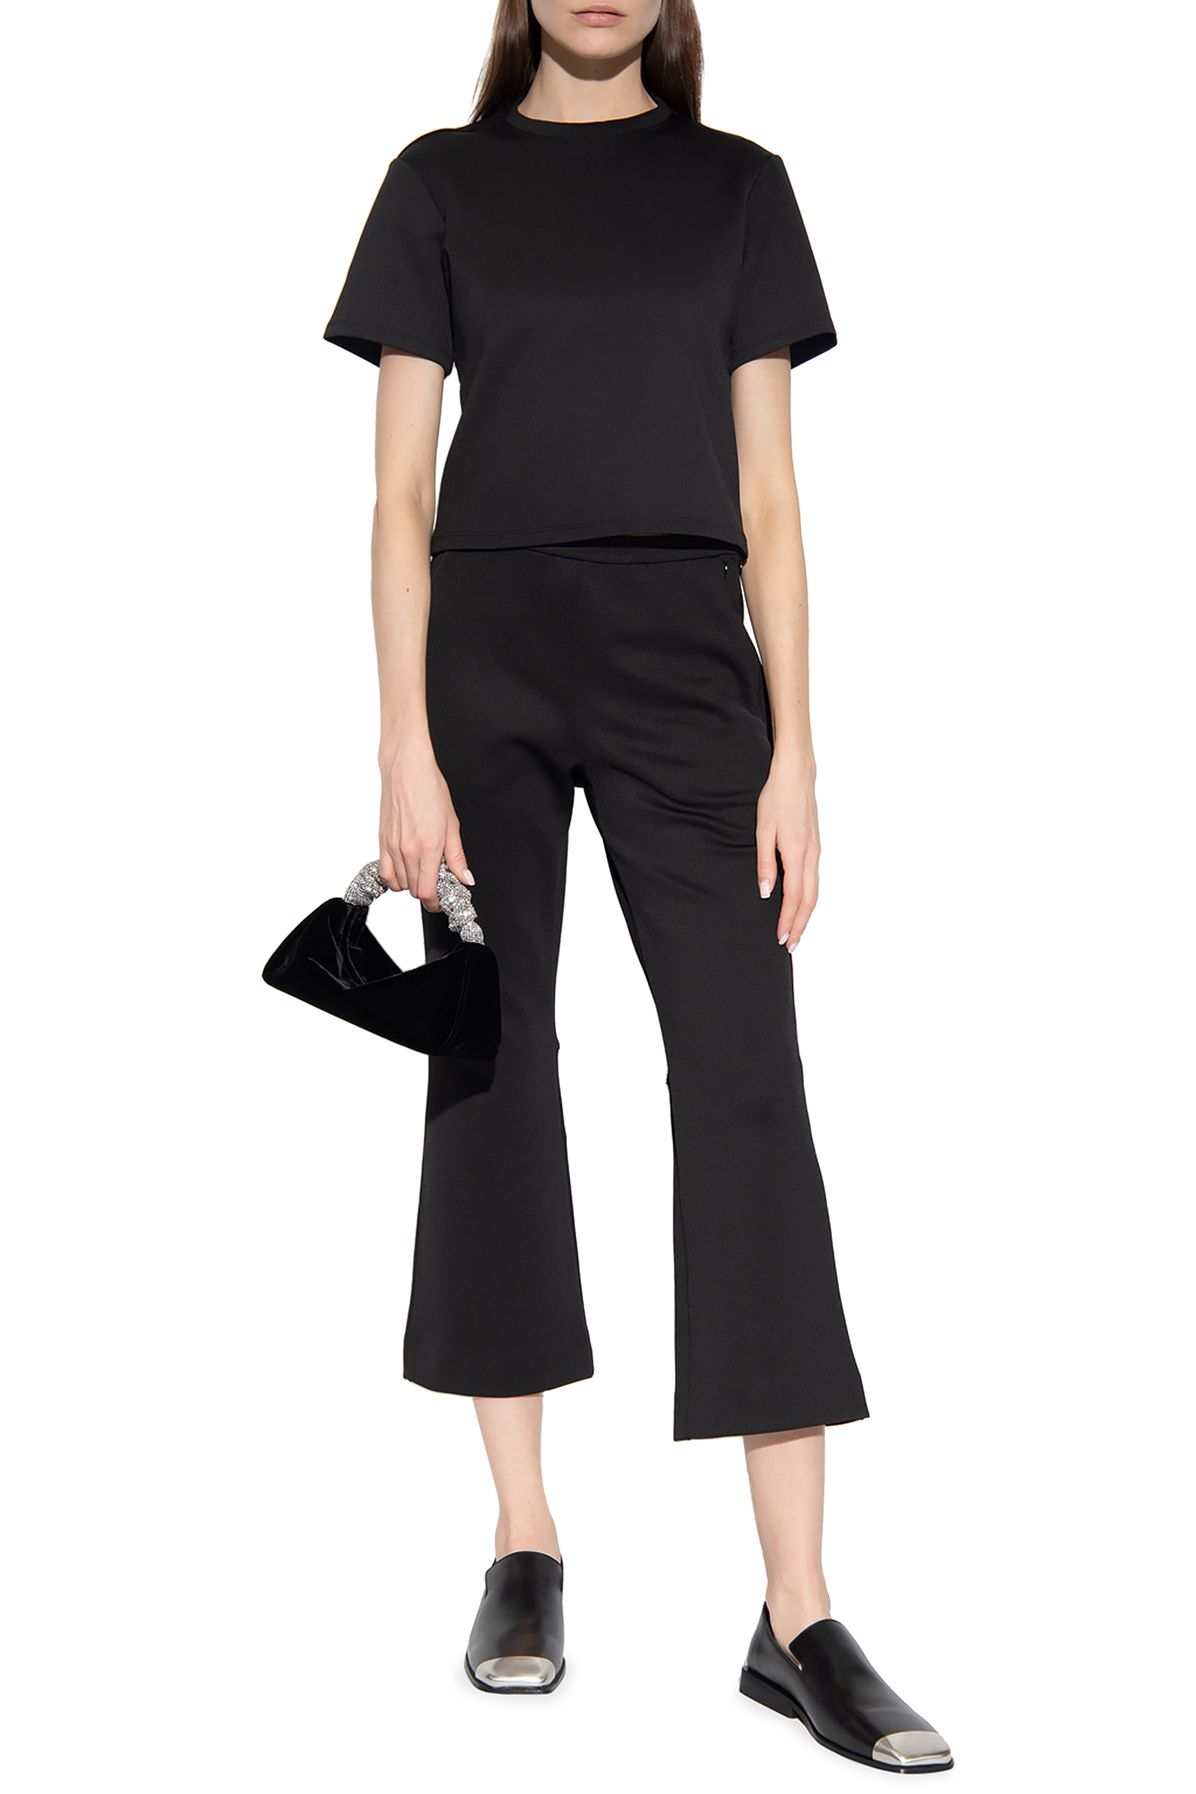 proenza schouler white label Flared trousers